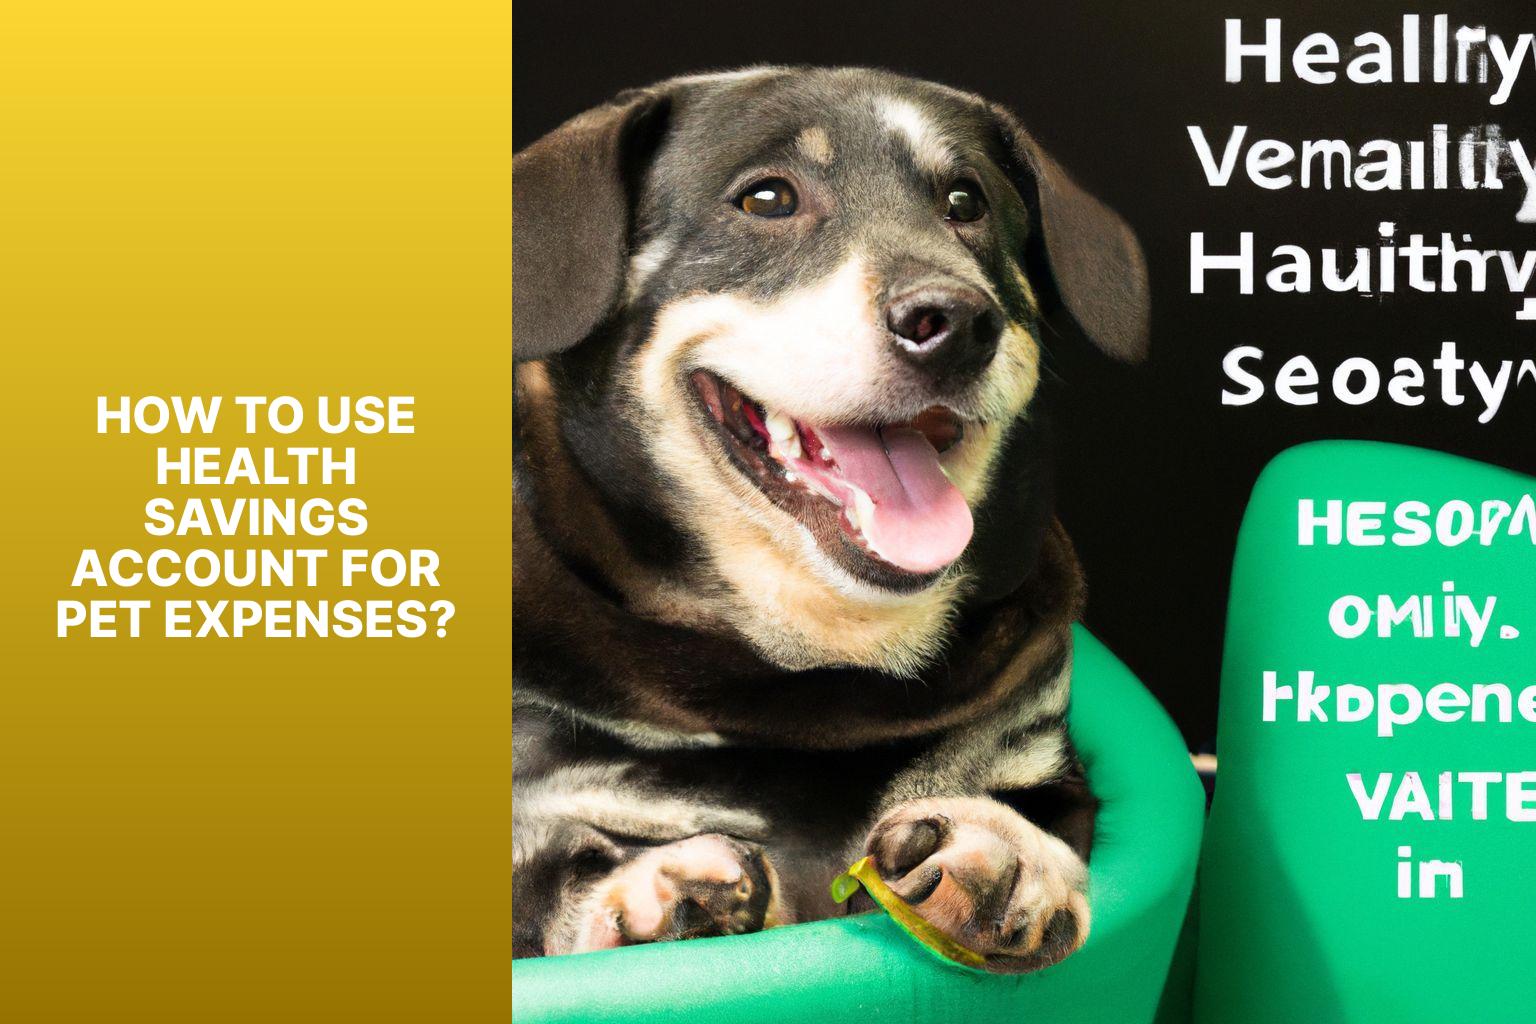 How to Use Health Savings Account for Pet Expenses? - Using Health Savings Account for Pets: Is It Possible? 